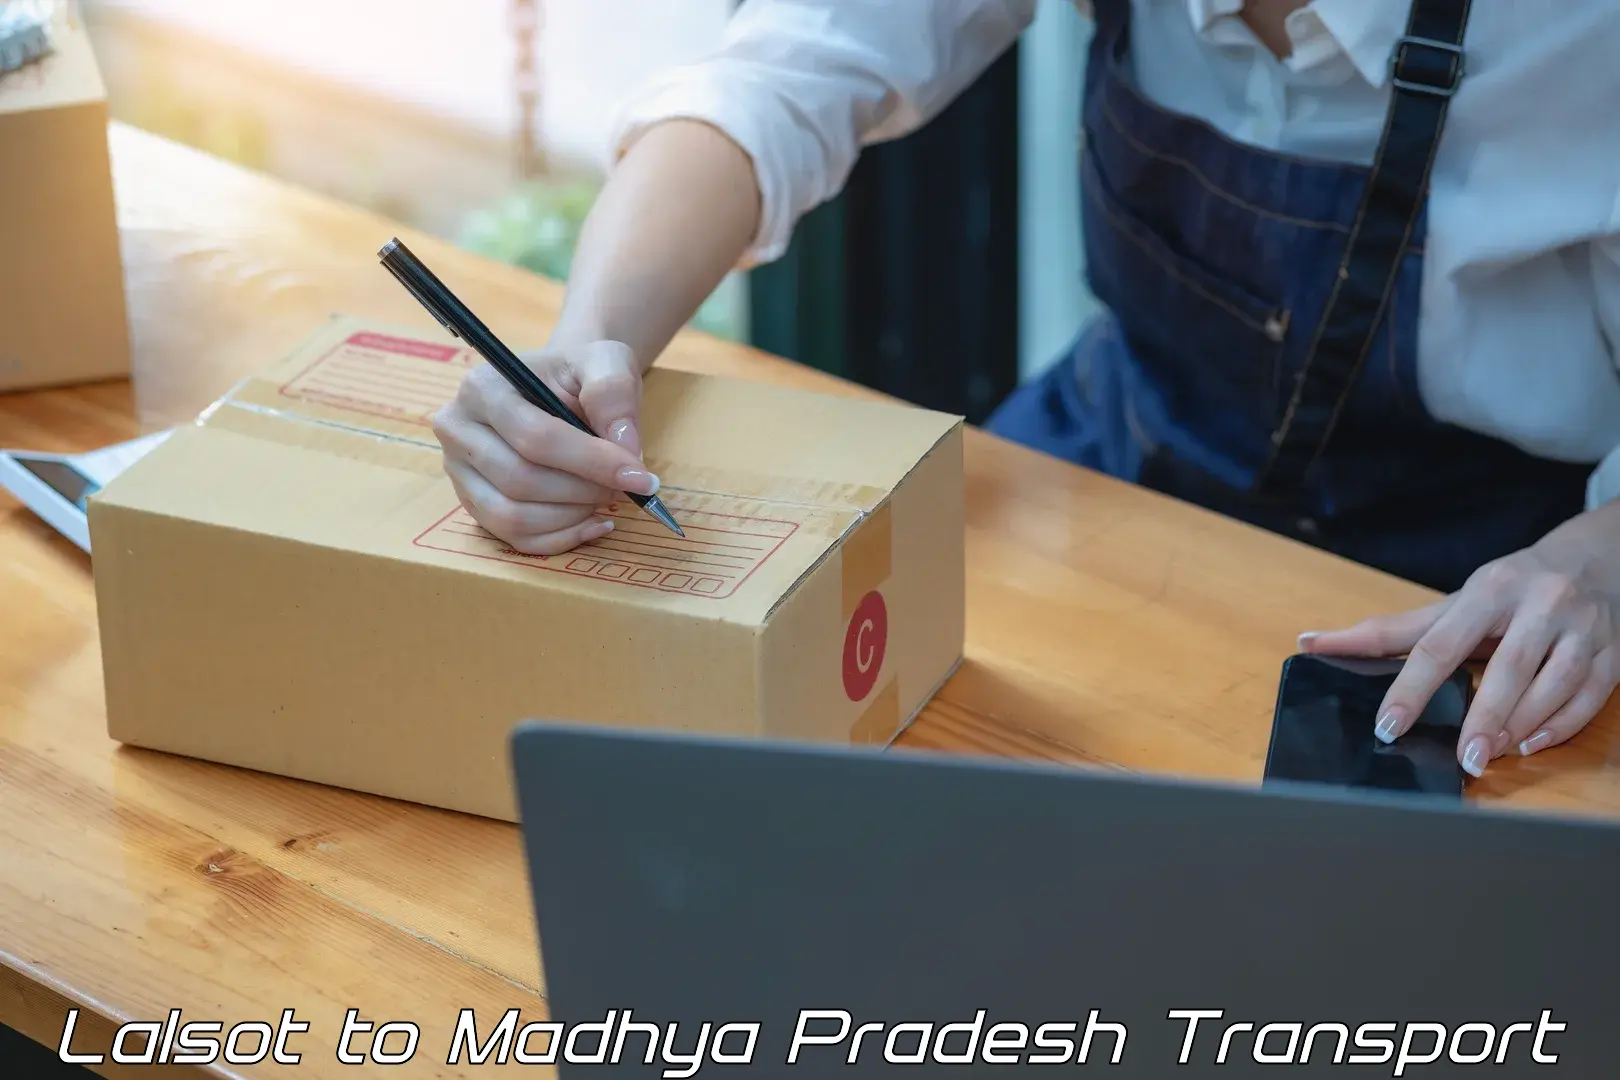 Delivery service Lalsot to Madhya Pradesh